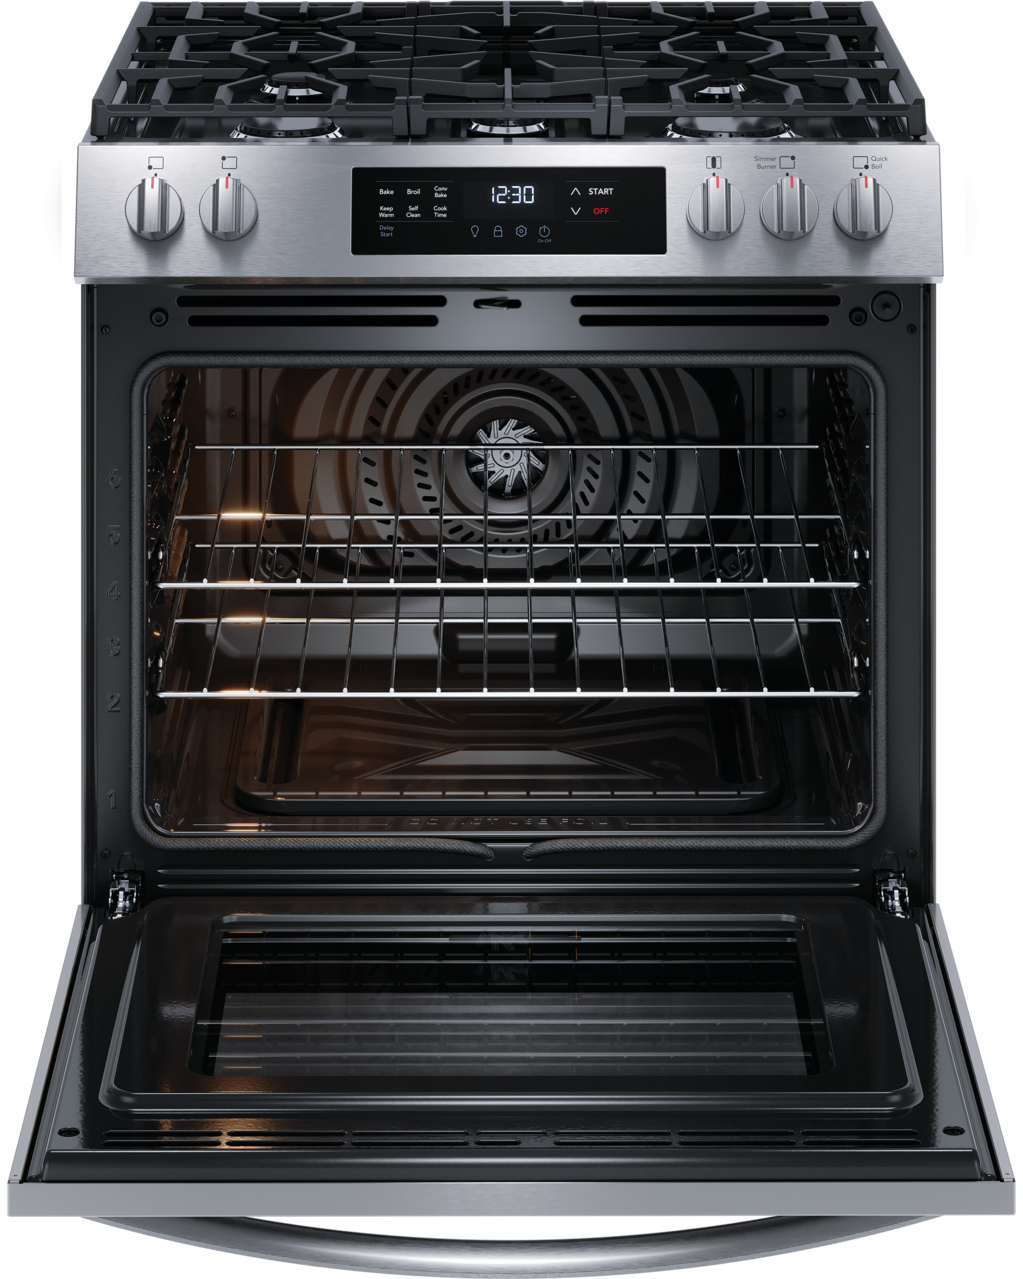 FRIGIDAIRE FCFG3083AS 30&quot; Front Control Gas Range with Convection Bake